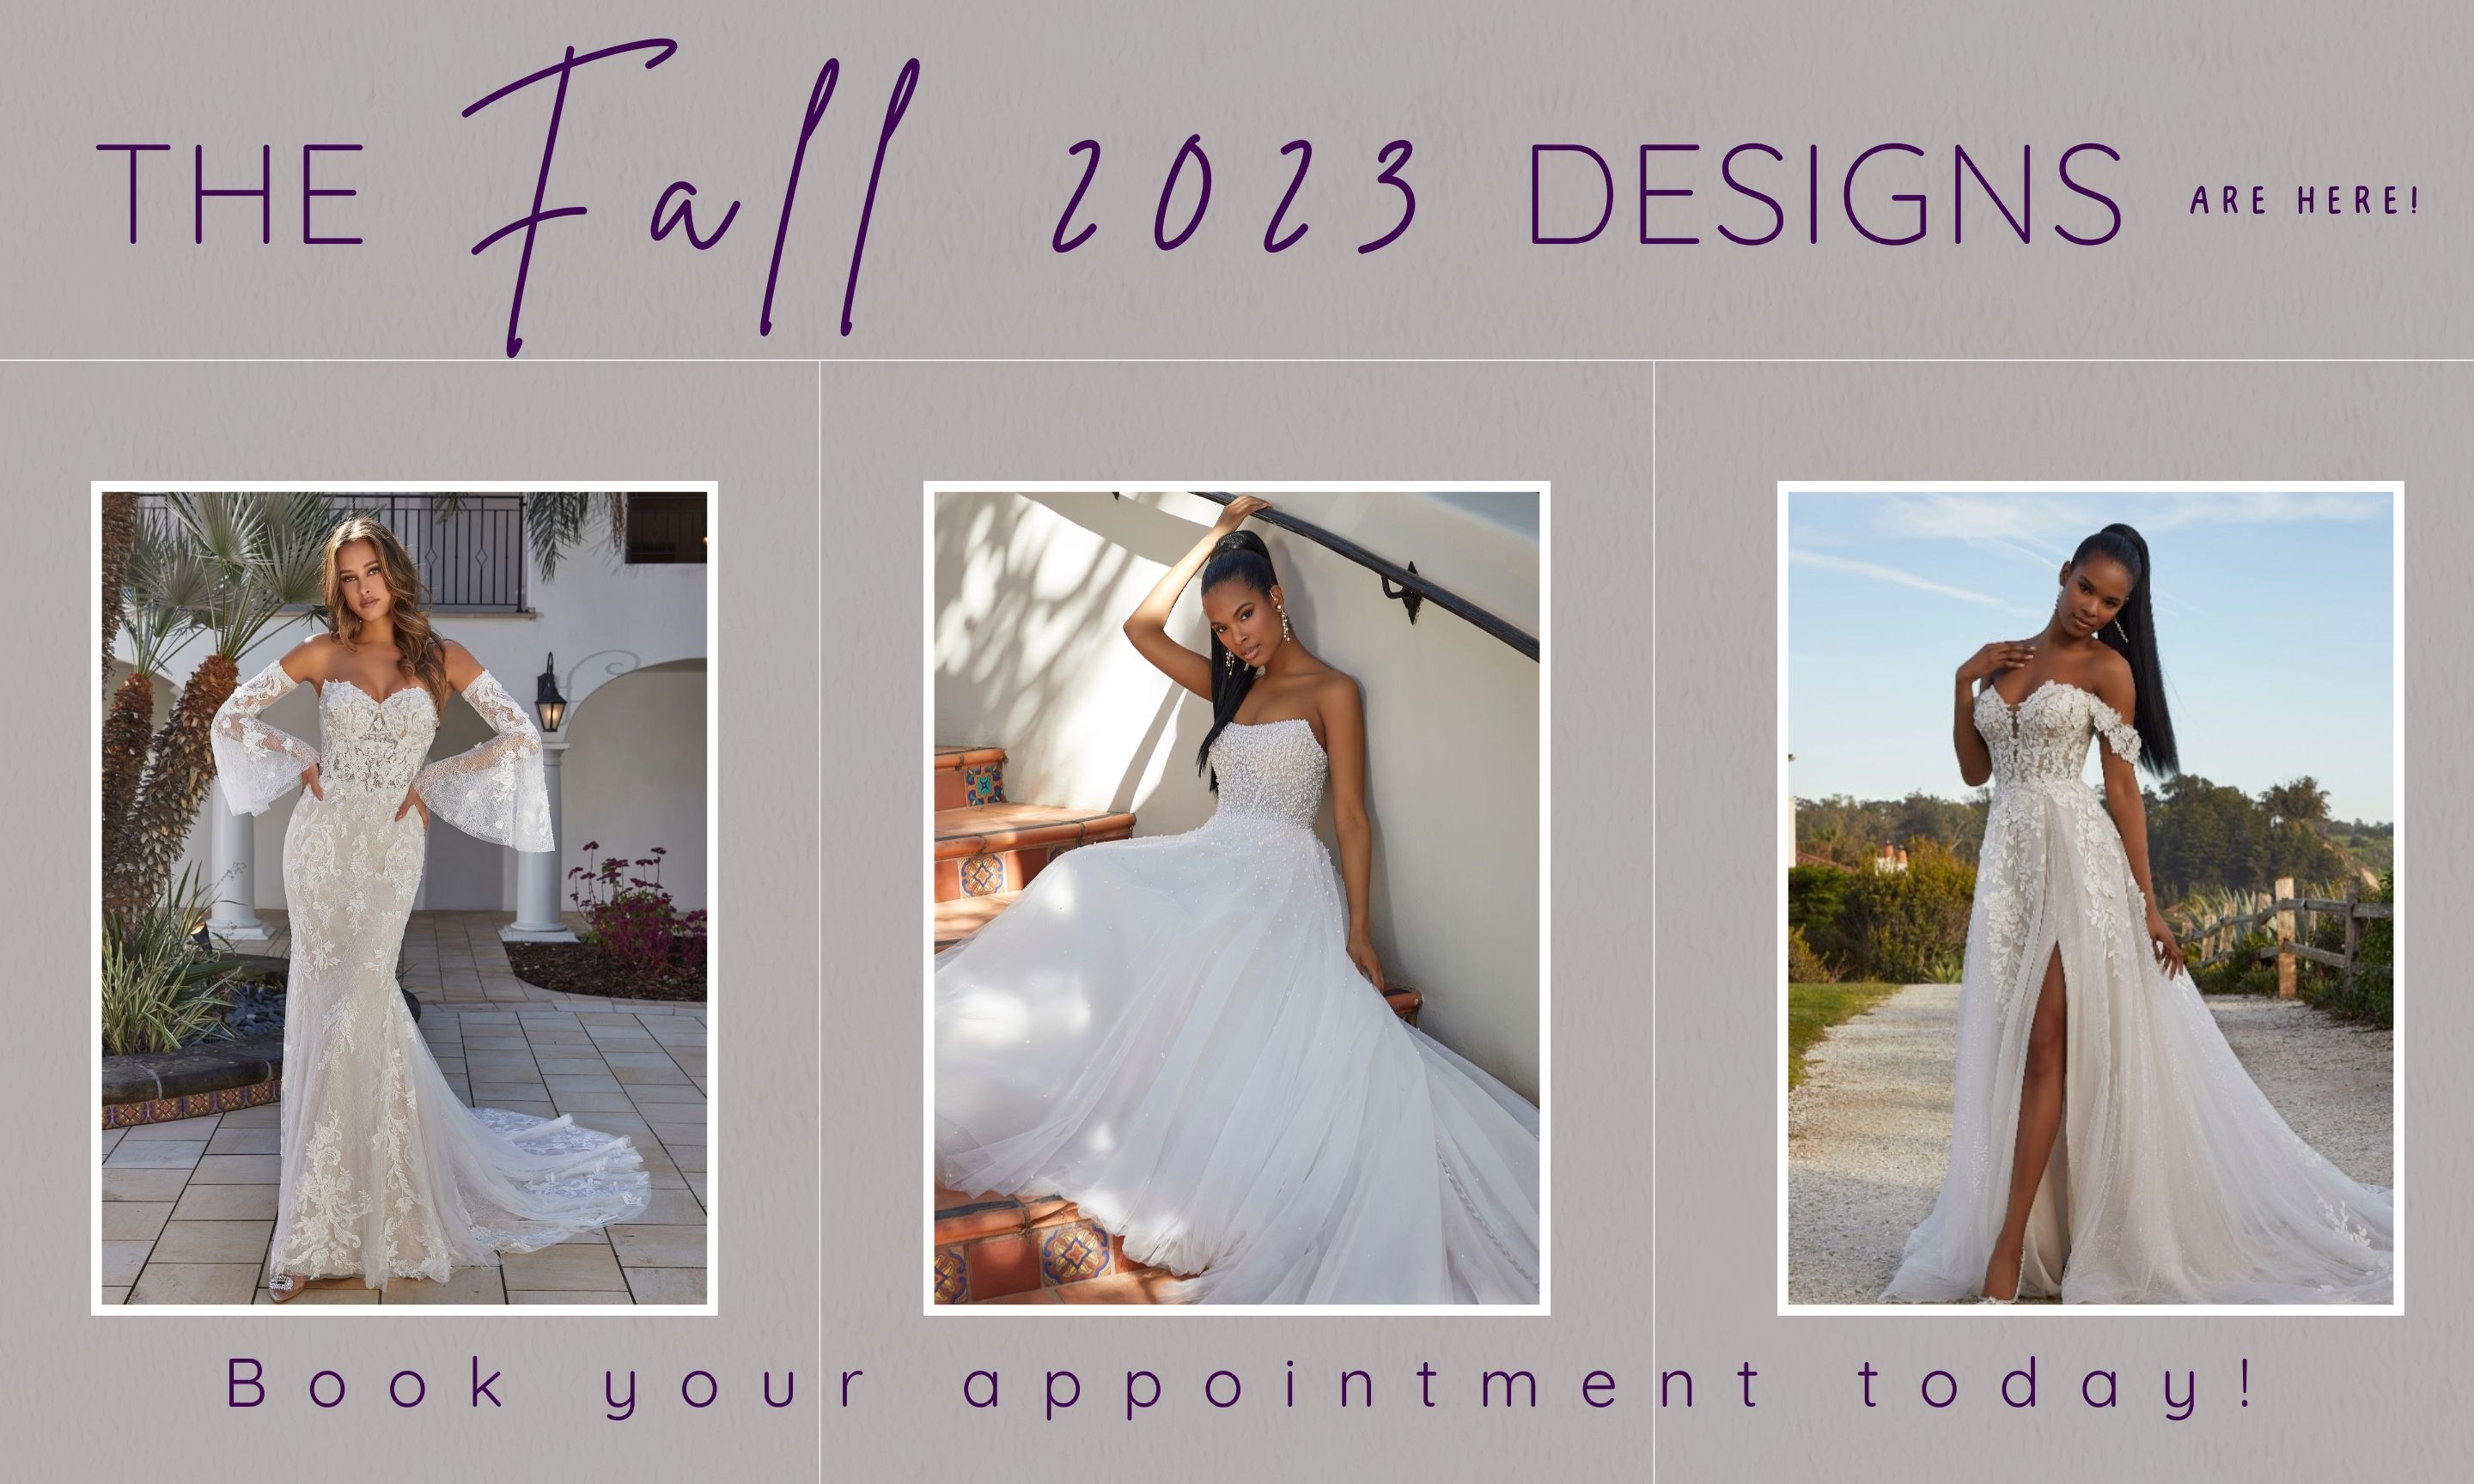 Book your appointment today!